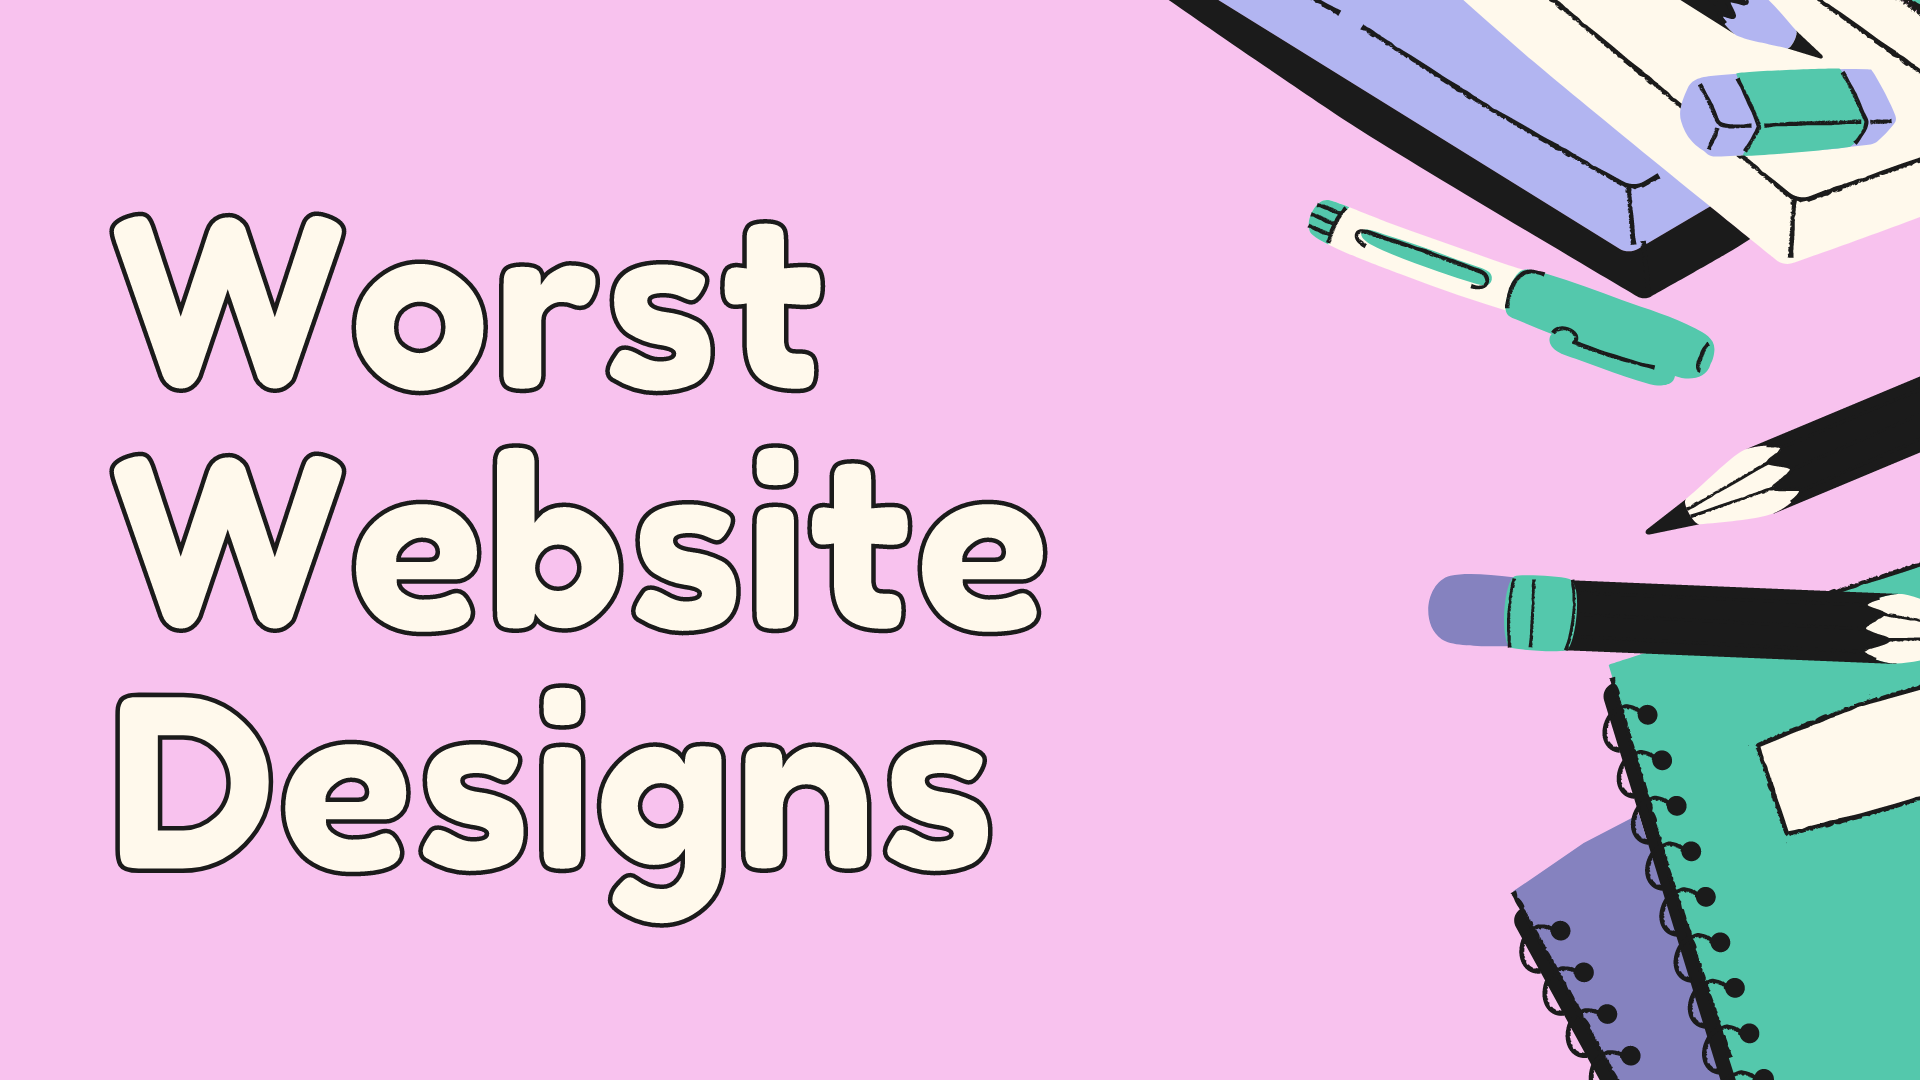 The Top 7 Worst Website Designs To Avoid